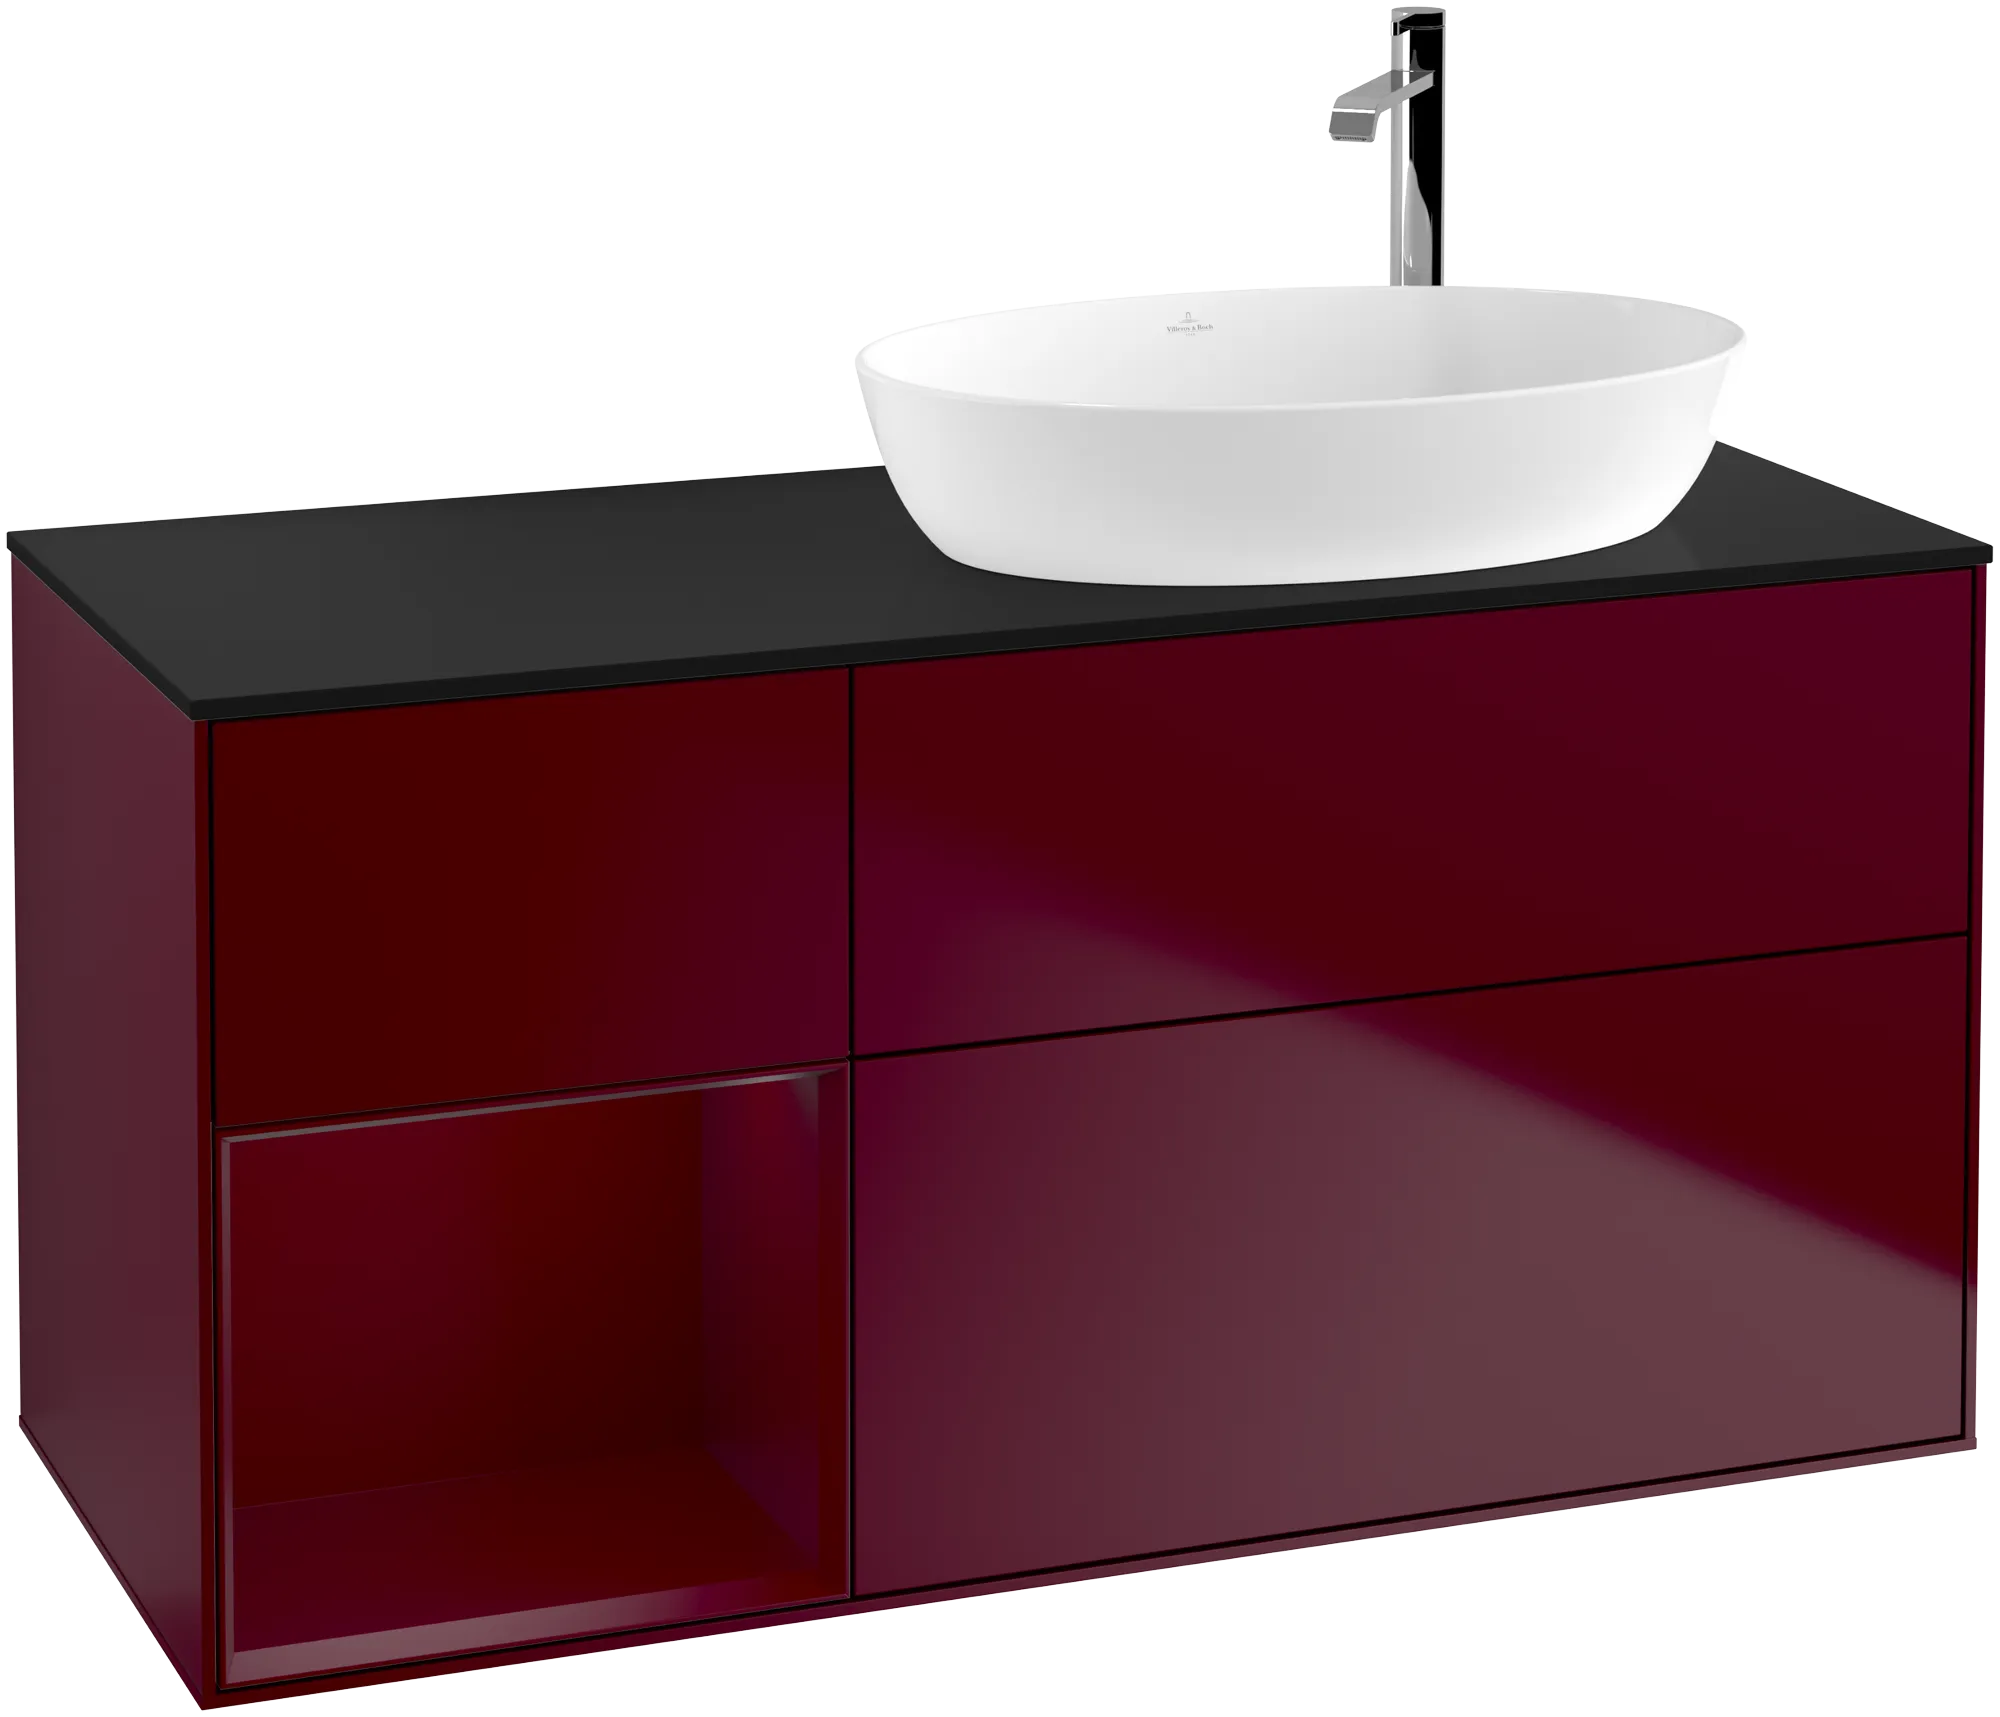 Picture of VILLEROY BOCH Finion Vanity unit, with lighting, 3 pull-out compartments, 1200 x 603 x 501 mm, Peony Matt Lacquer / Peony Matt Lacquer / Glass Black Matt #G922HBHB